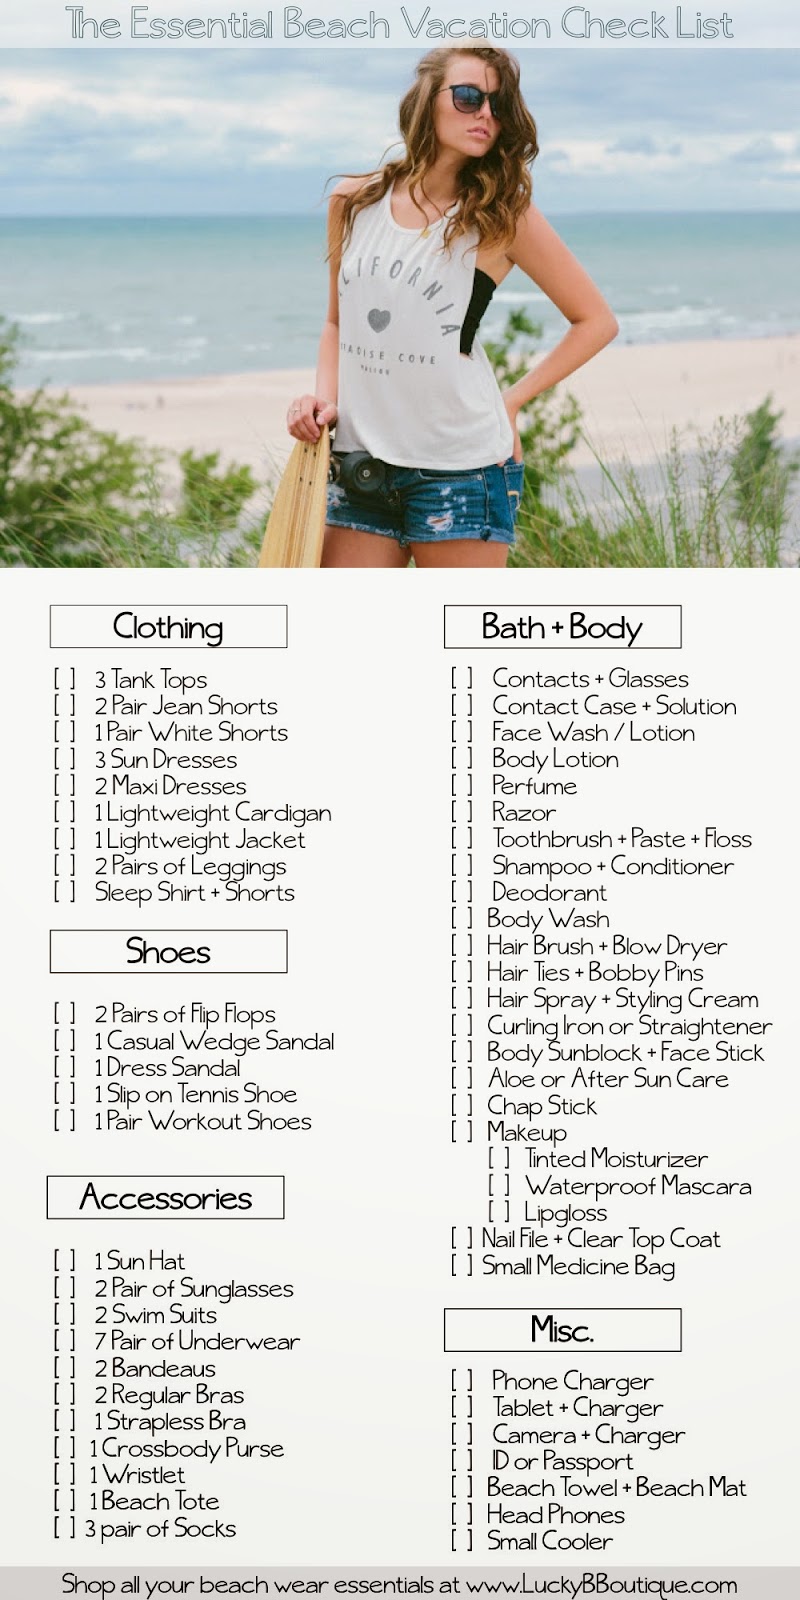 Lucky B Boutique The Essential Beach Vacation Packing Check List